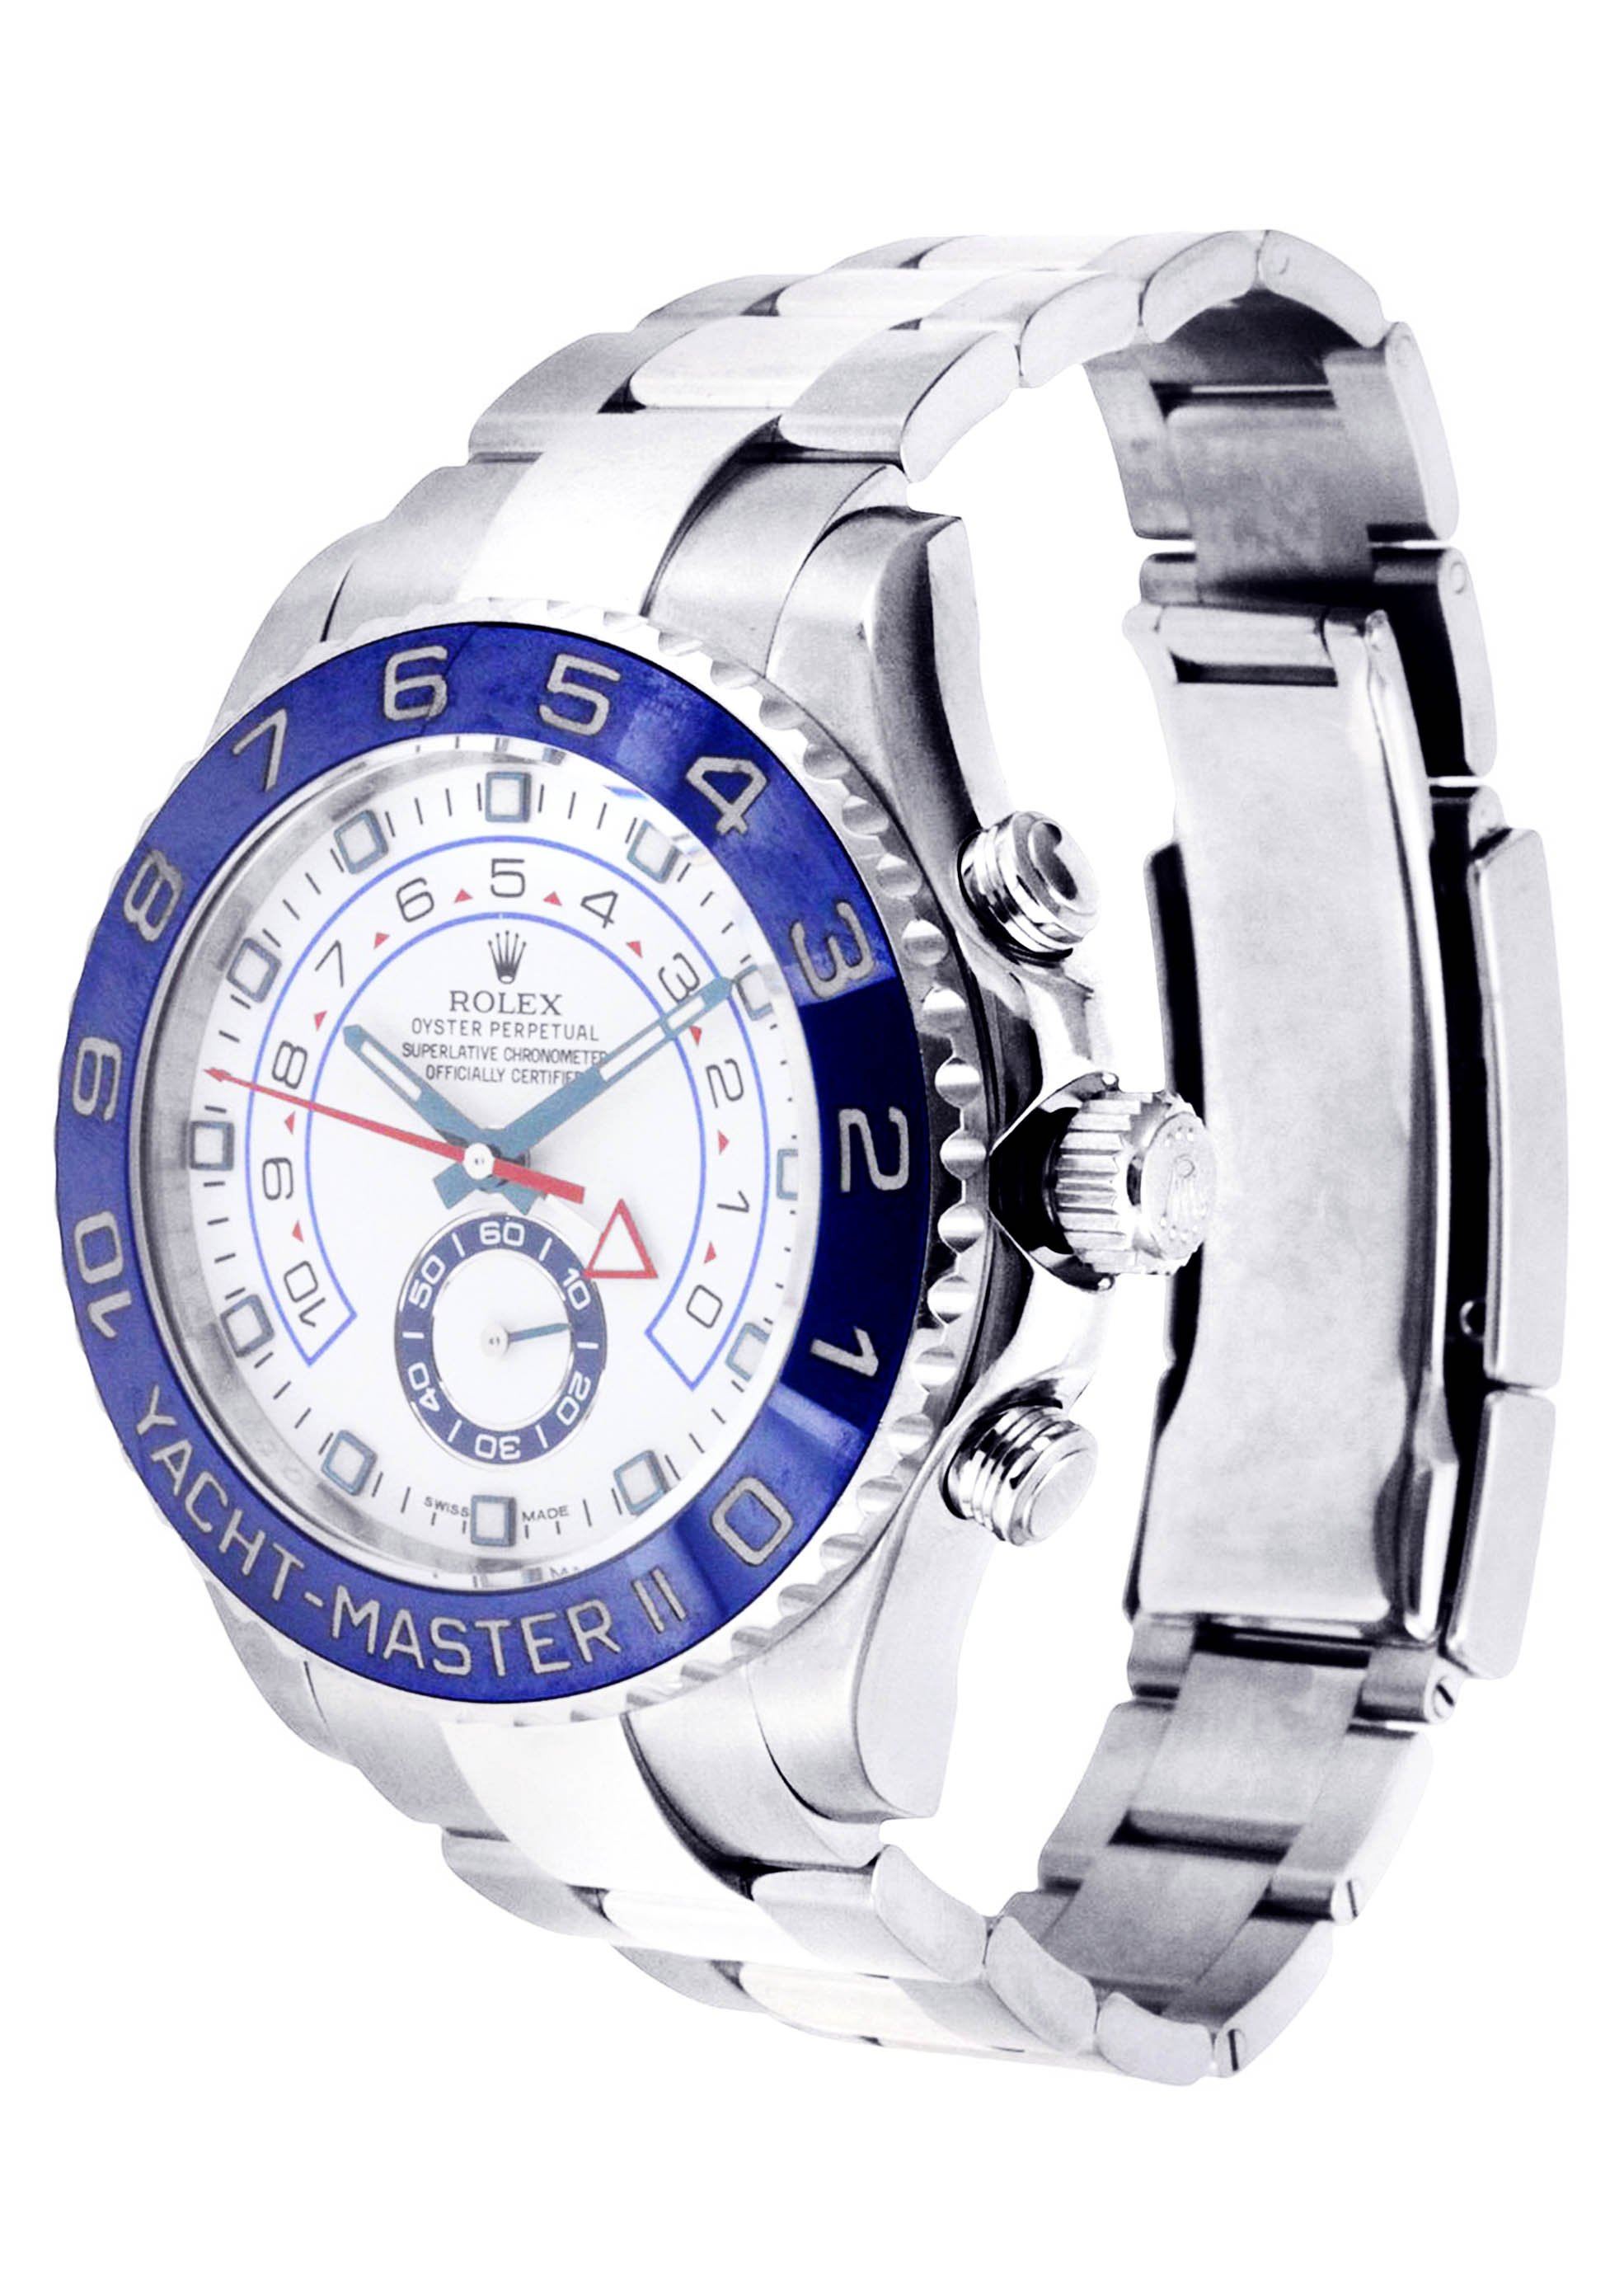 yacht master stainless